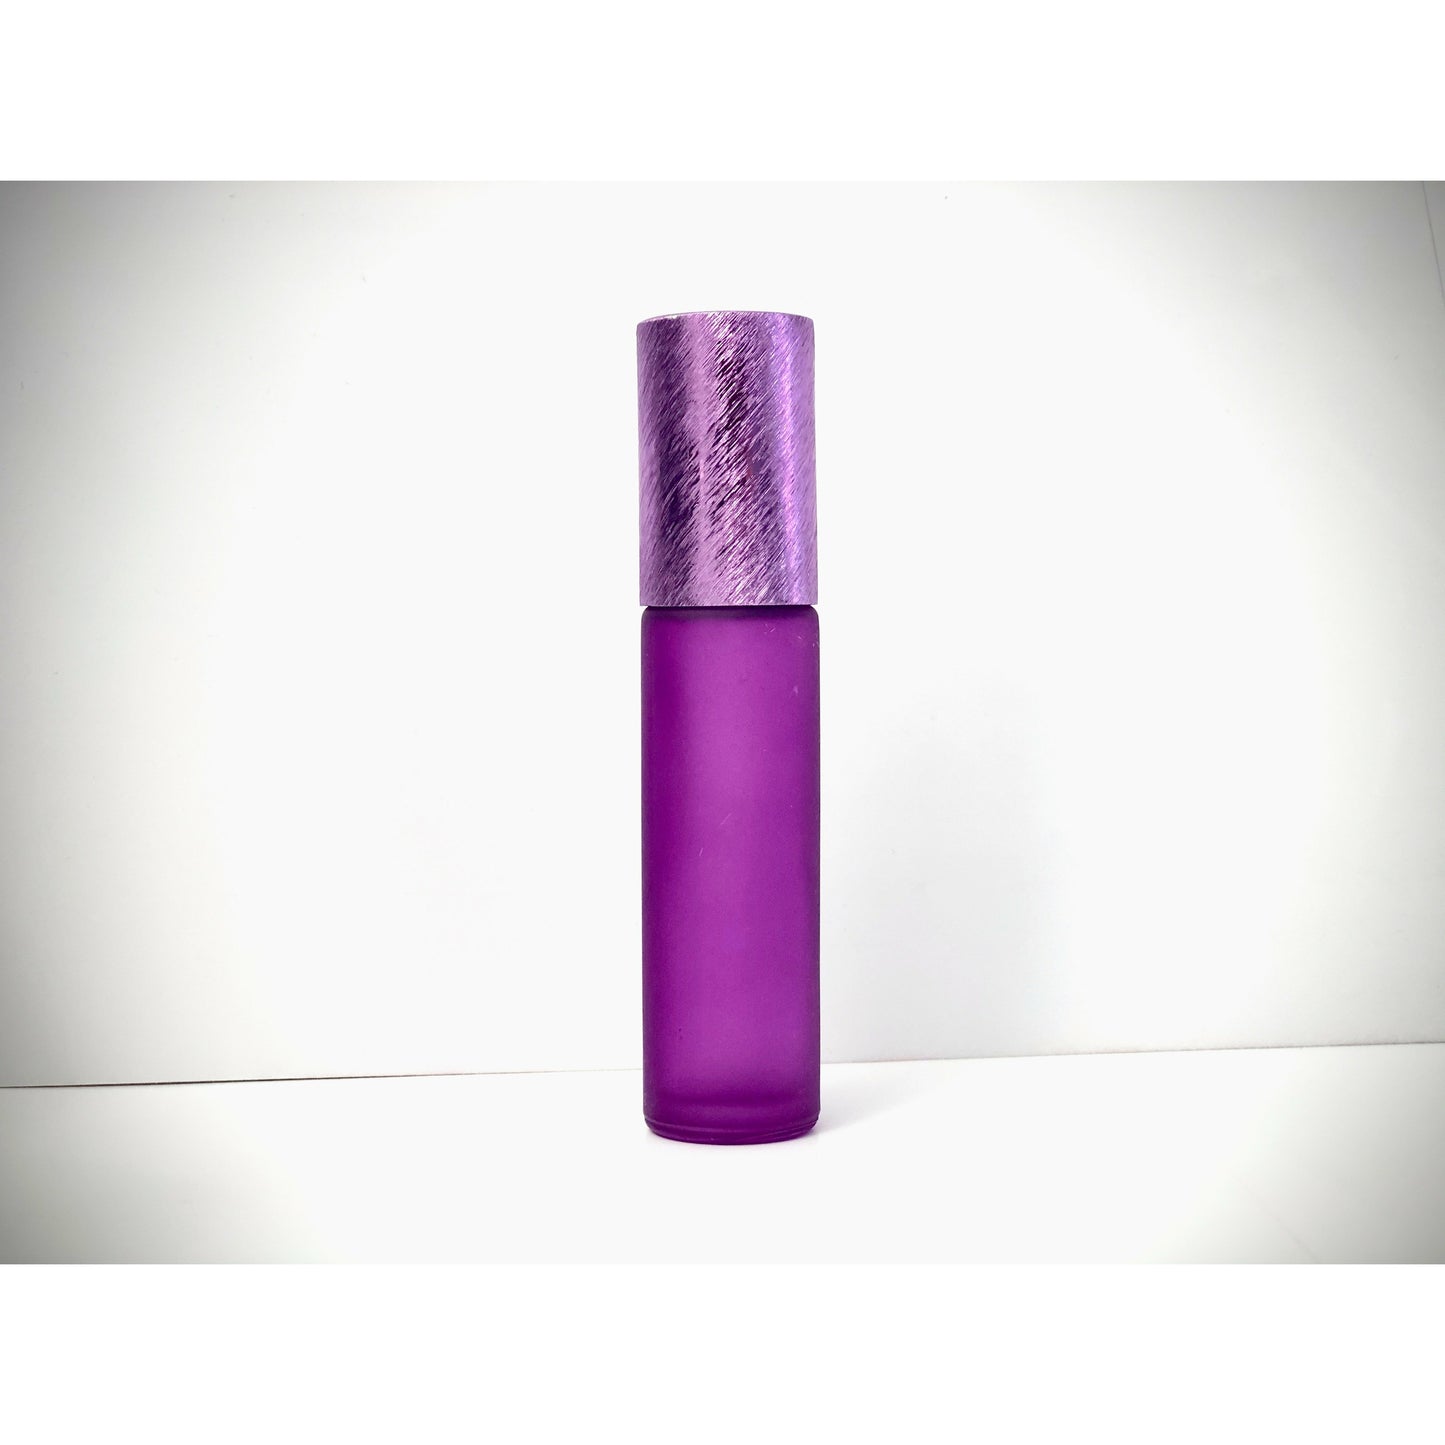 10ml colored glass roll-on bottles in purple with metallic purple screw caps (6-pack)